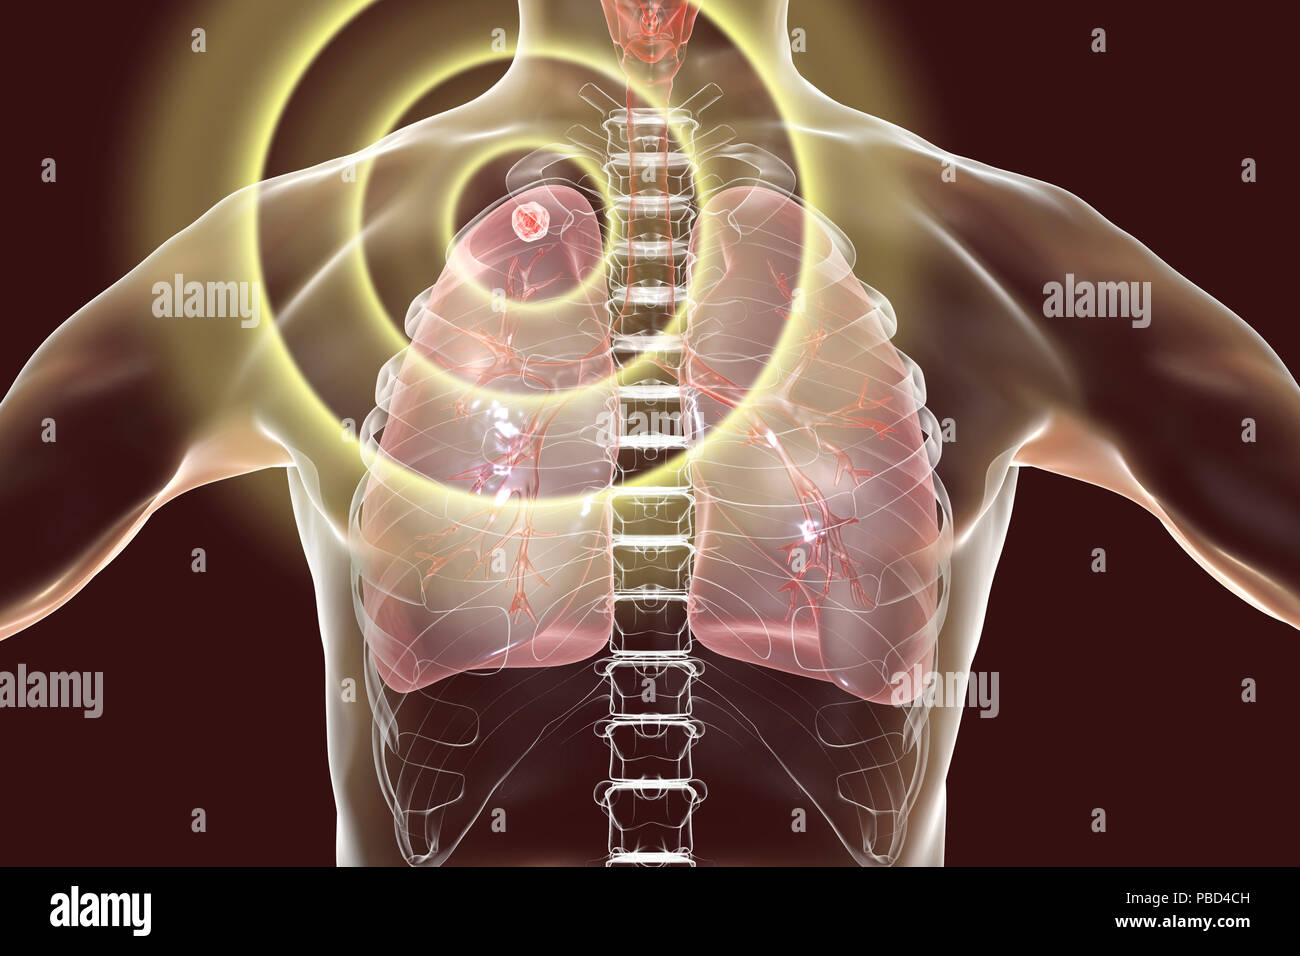 Treatment and prevention of tuberculosis, conceptual illustration. Stock Photo